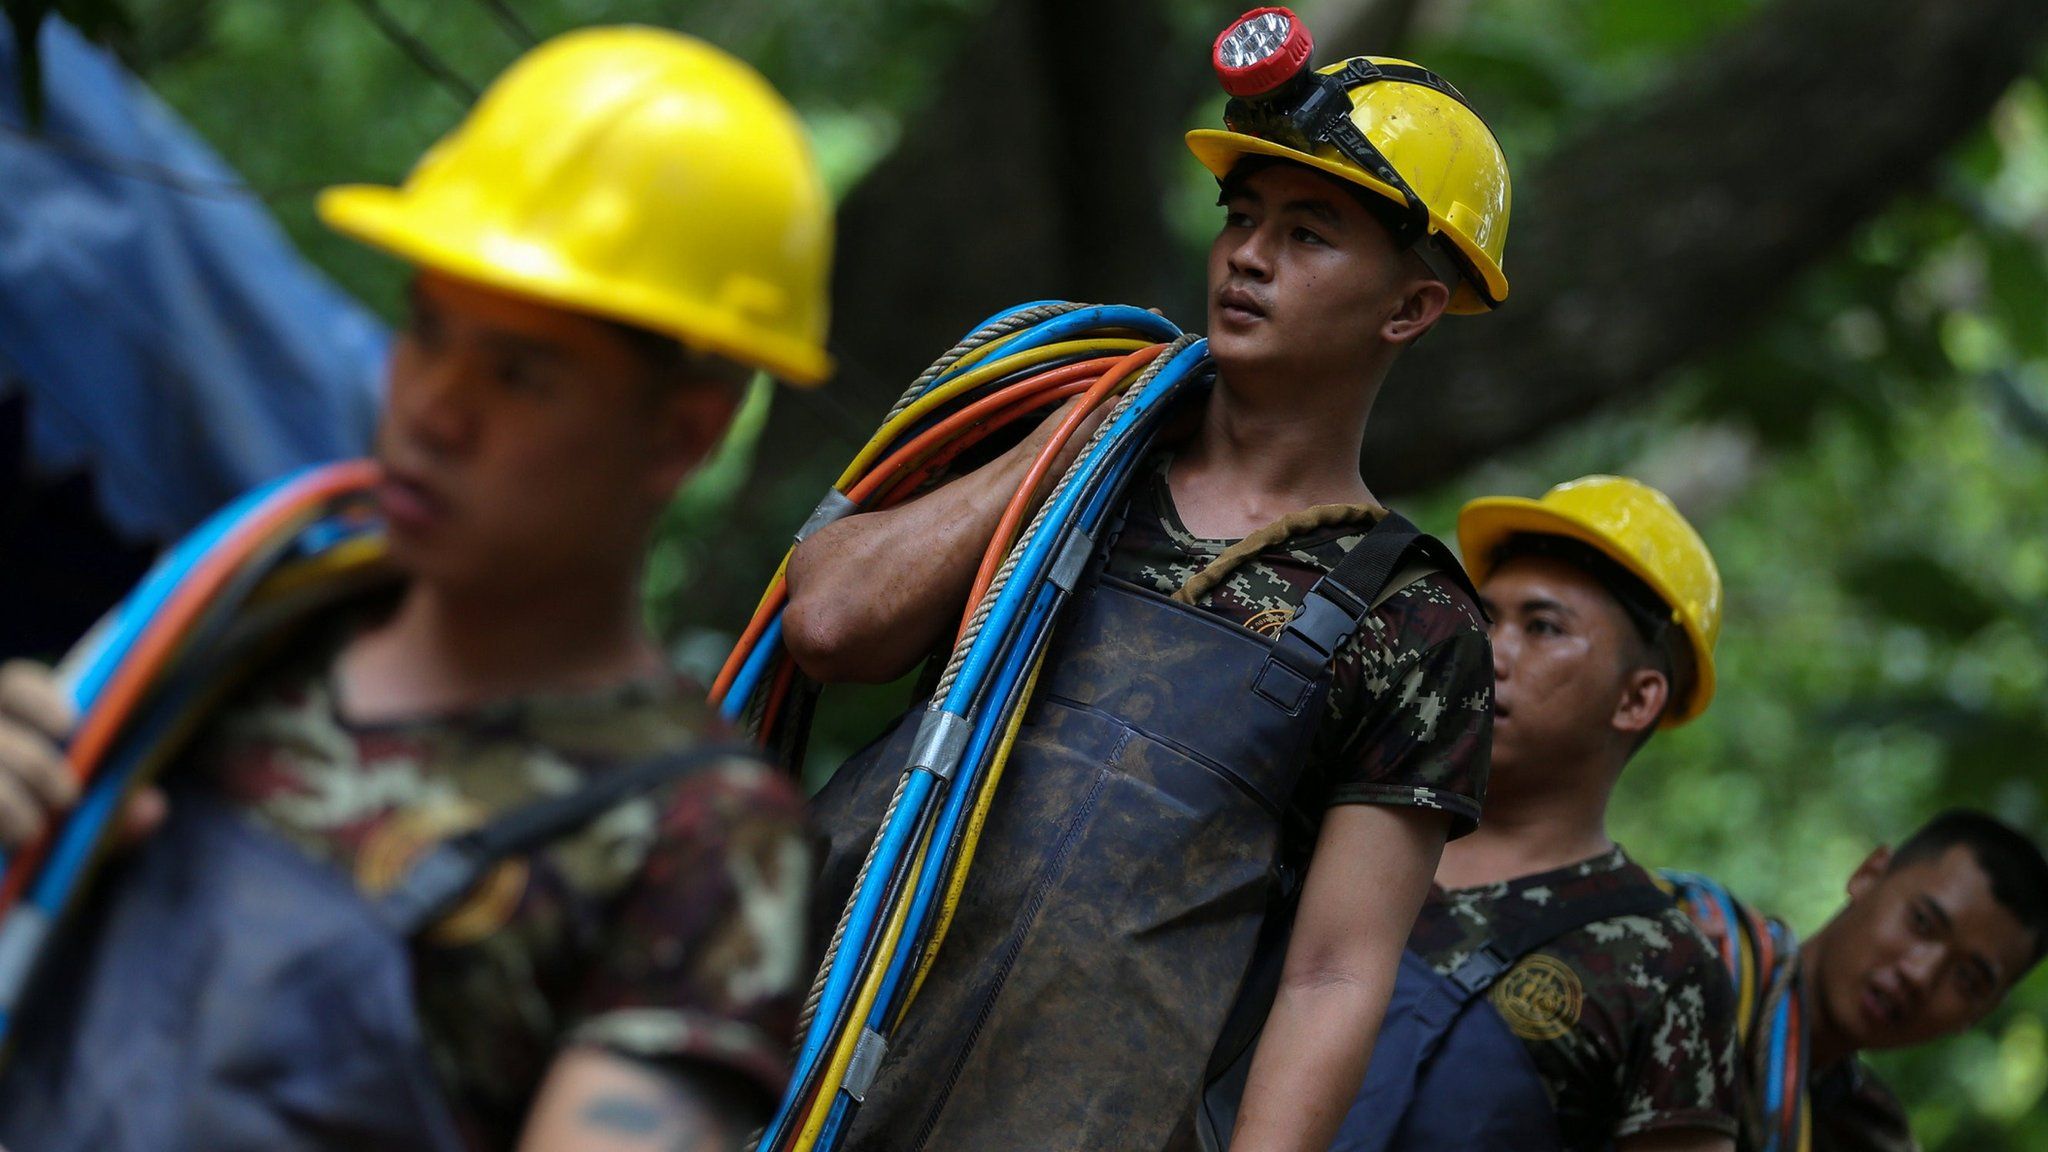 Rescuers carry cables outside the Tham Luang cave complex in Thailand on 5 July 2018